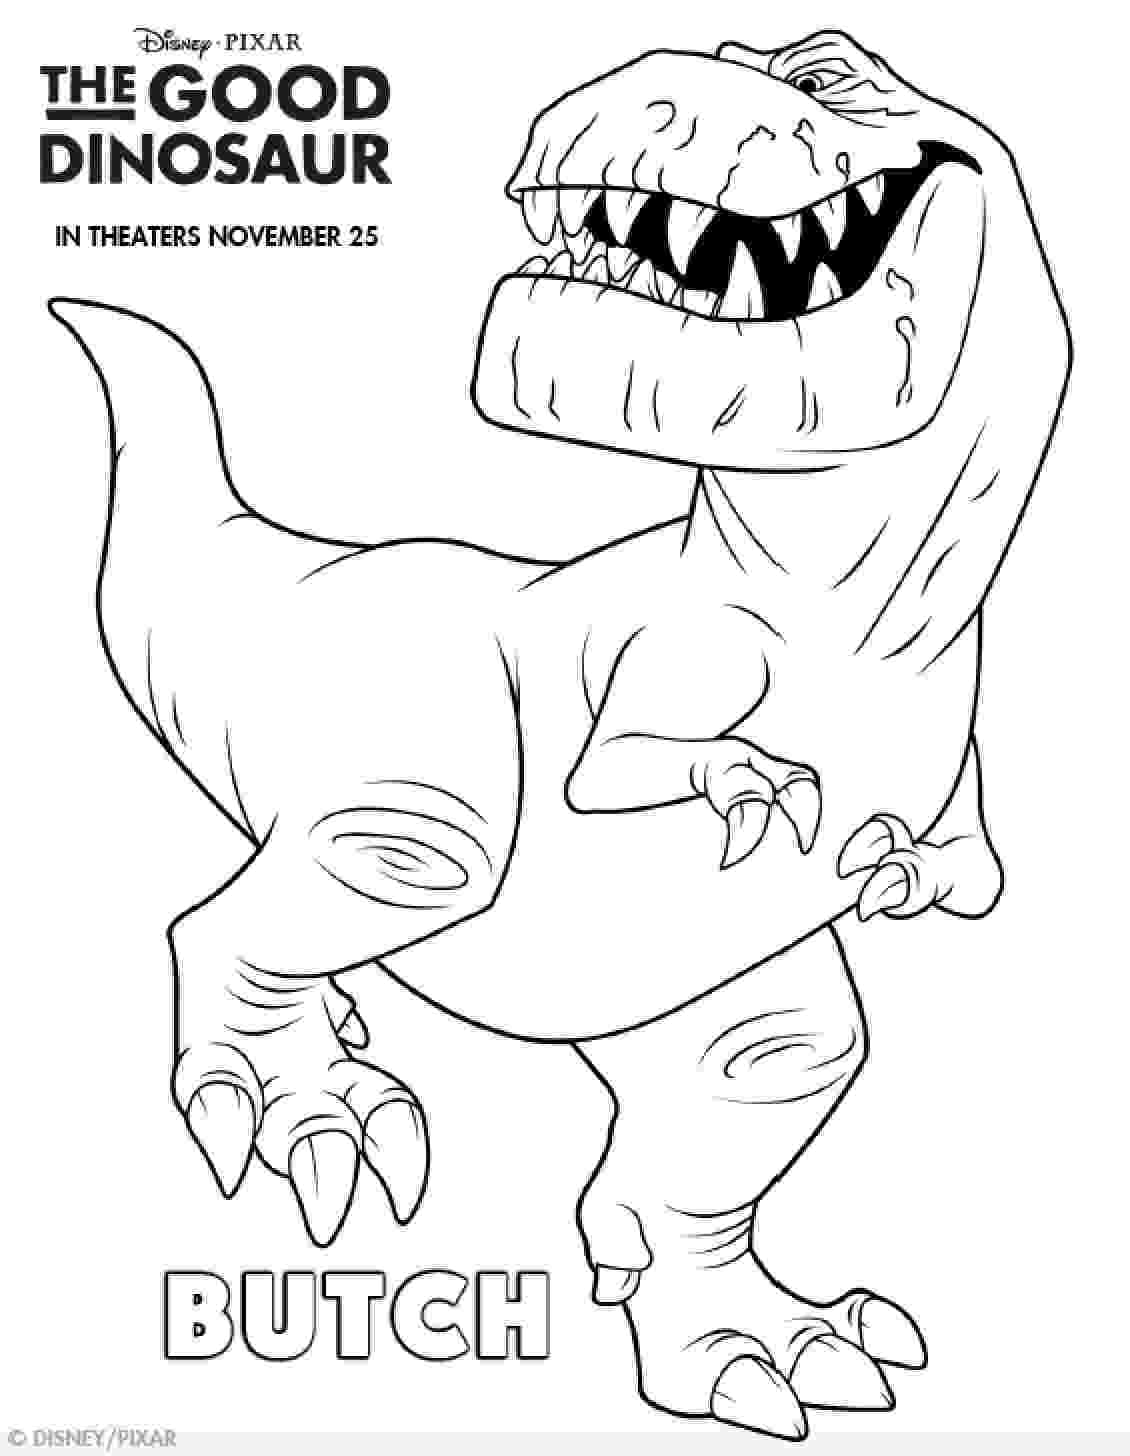 dinosaur coloring pages for toddlers דף צביעה דינוזאור רקס dinosaur coloring pages for pages toddlers coloring dinosaur 